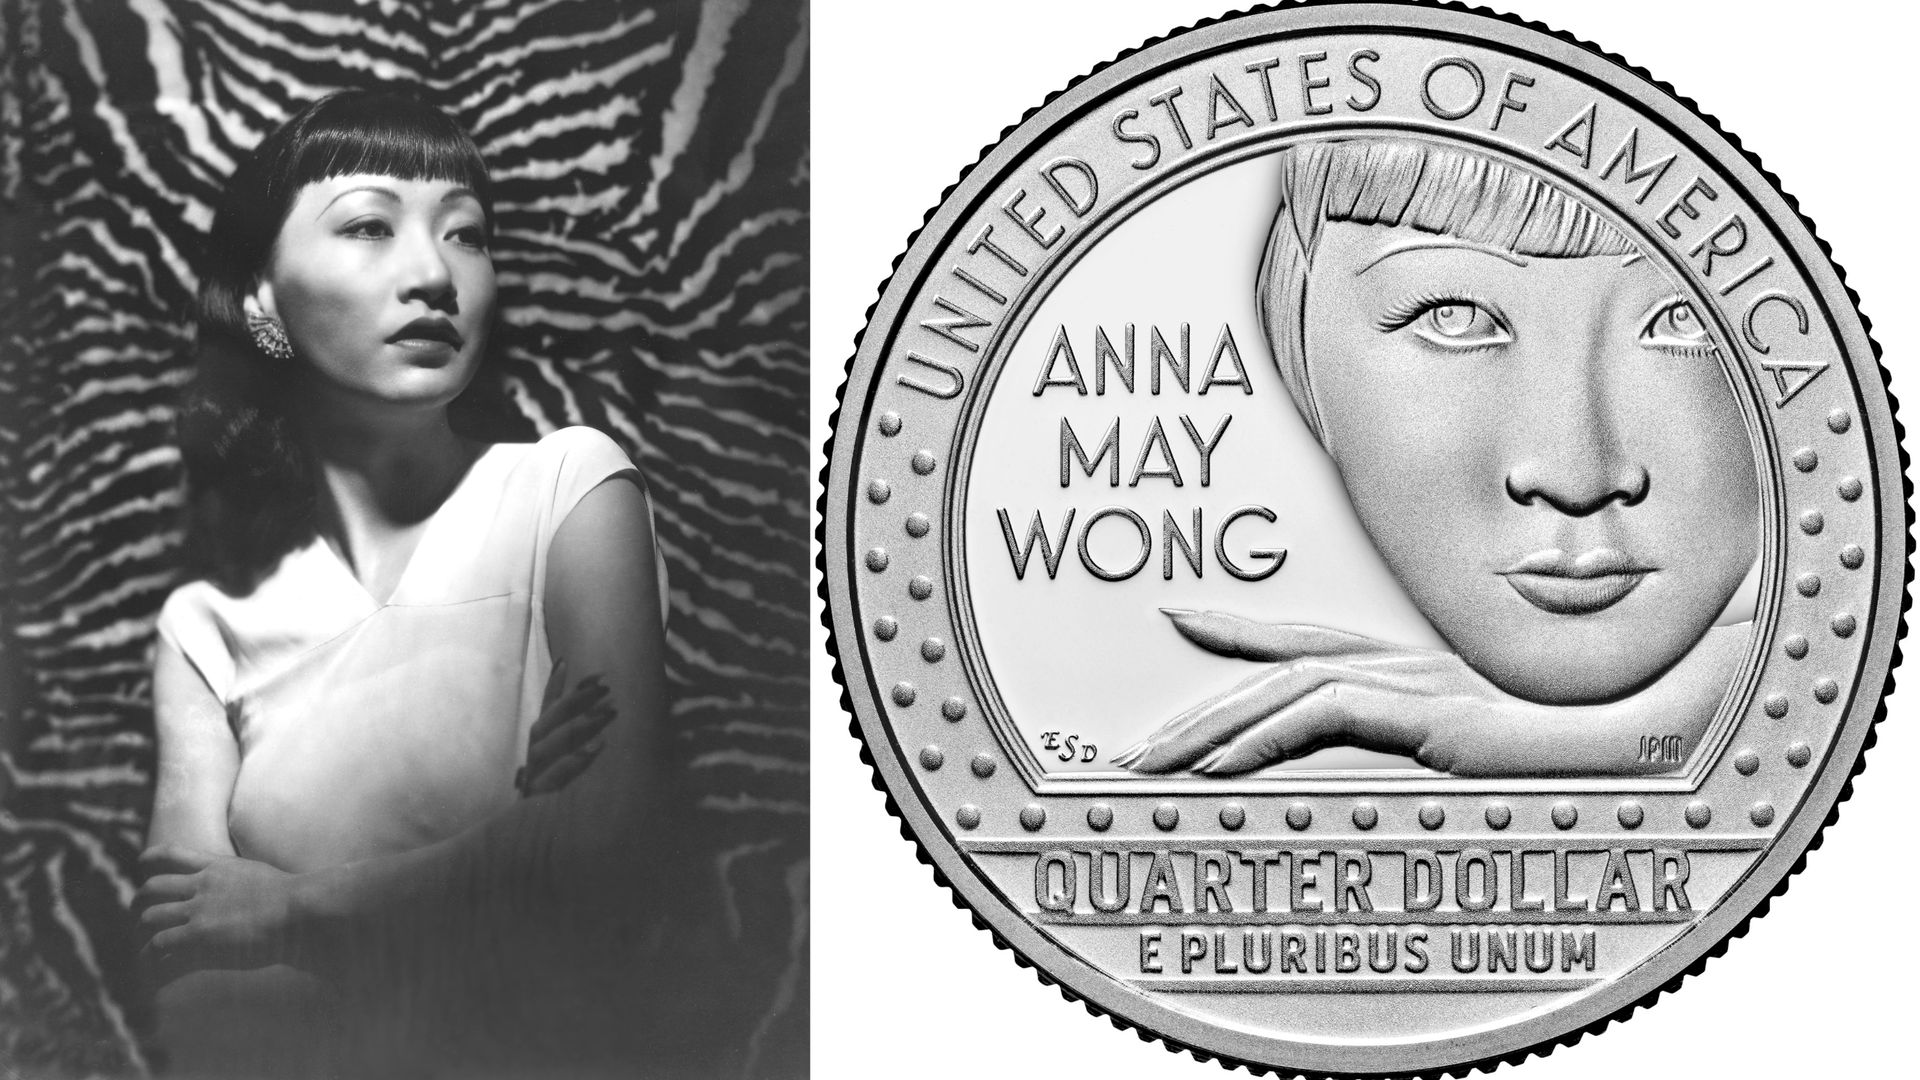 Portrait of Anna May Wong in a dress with her arms crossed next to a drawing of the Anna May Wong neighborhood